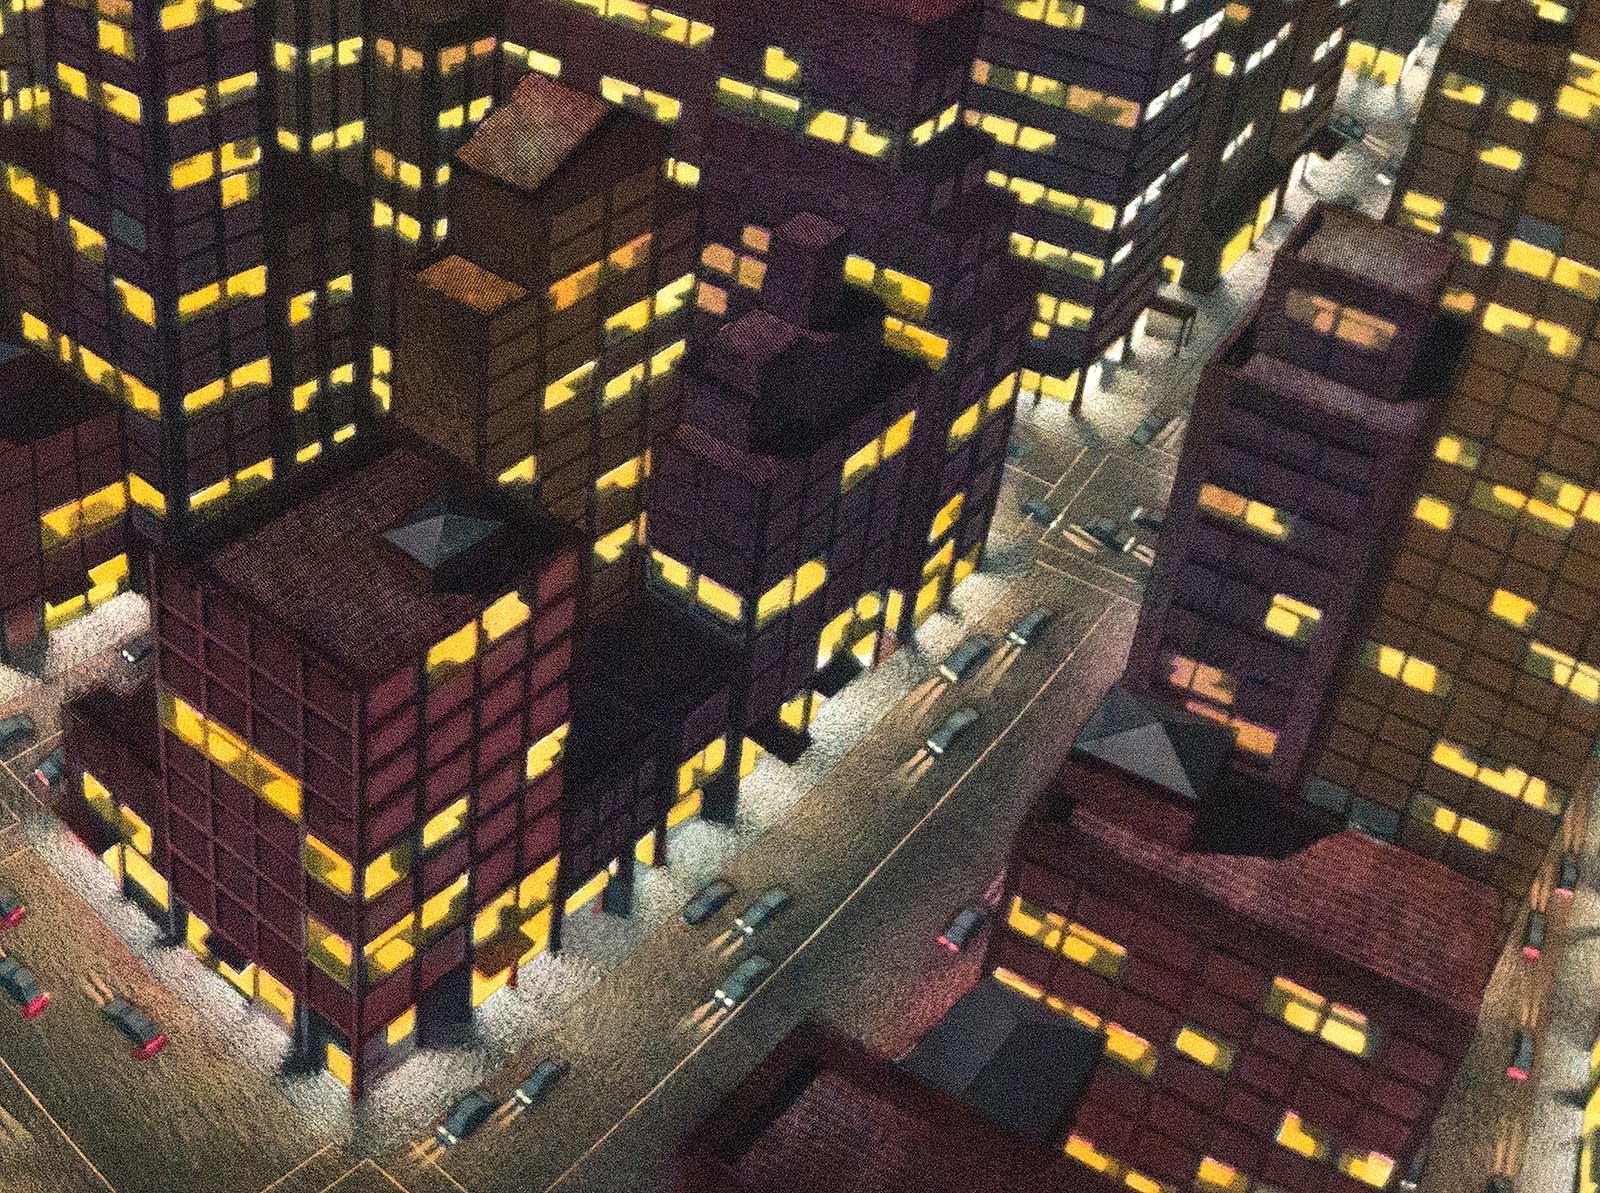 Nocturne (A panorama of lit skyscrapers and moving traffic in the city) - Print by Art Werger